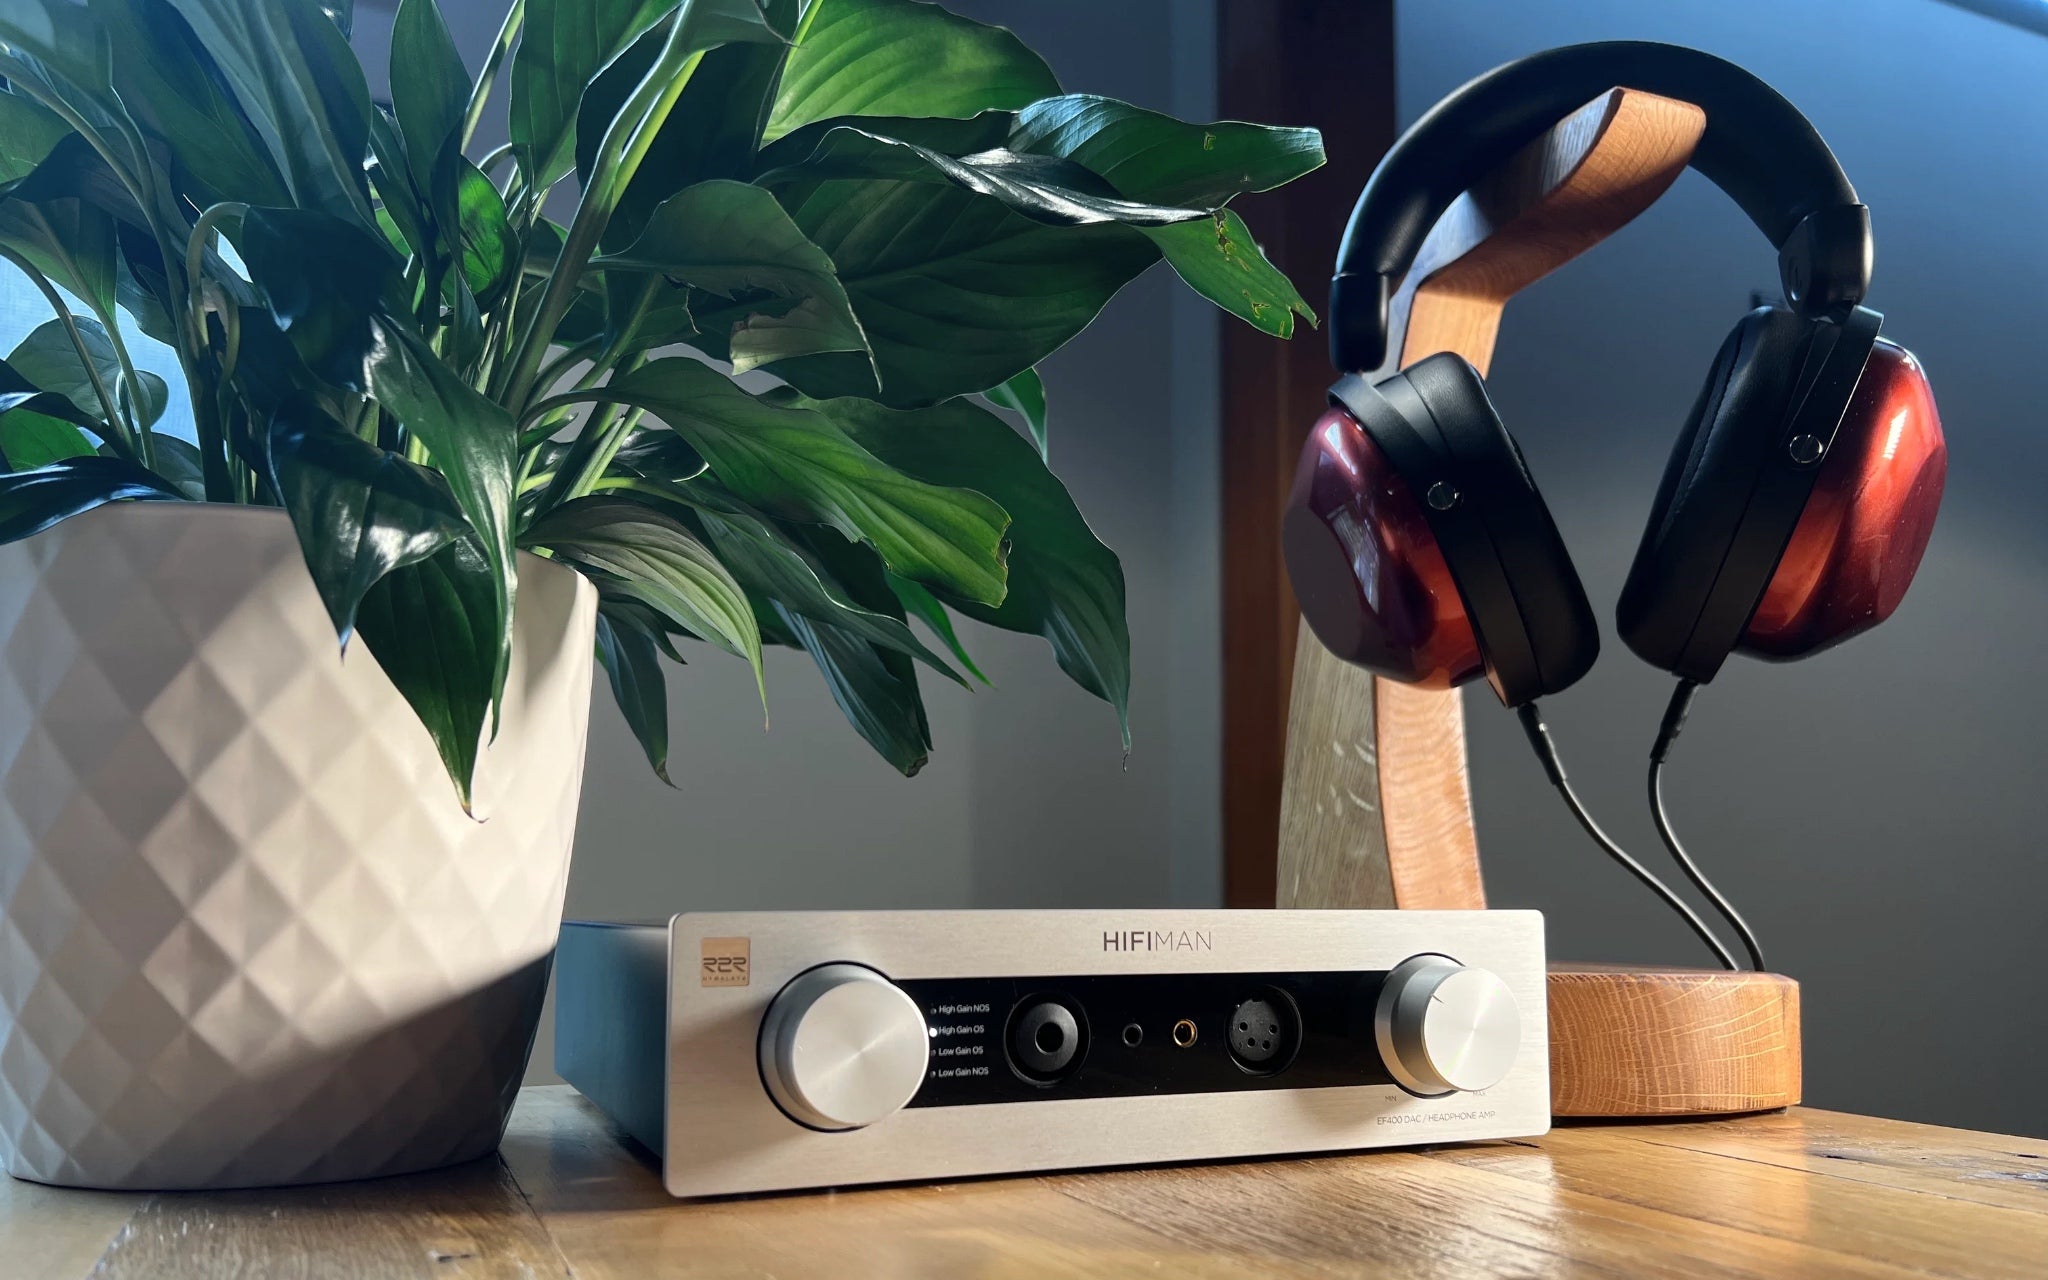 HiFiMAN EF400 amp with closed back headphones, stand and plant from Bloom Audio gallery